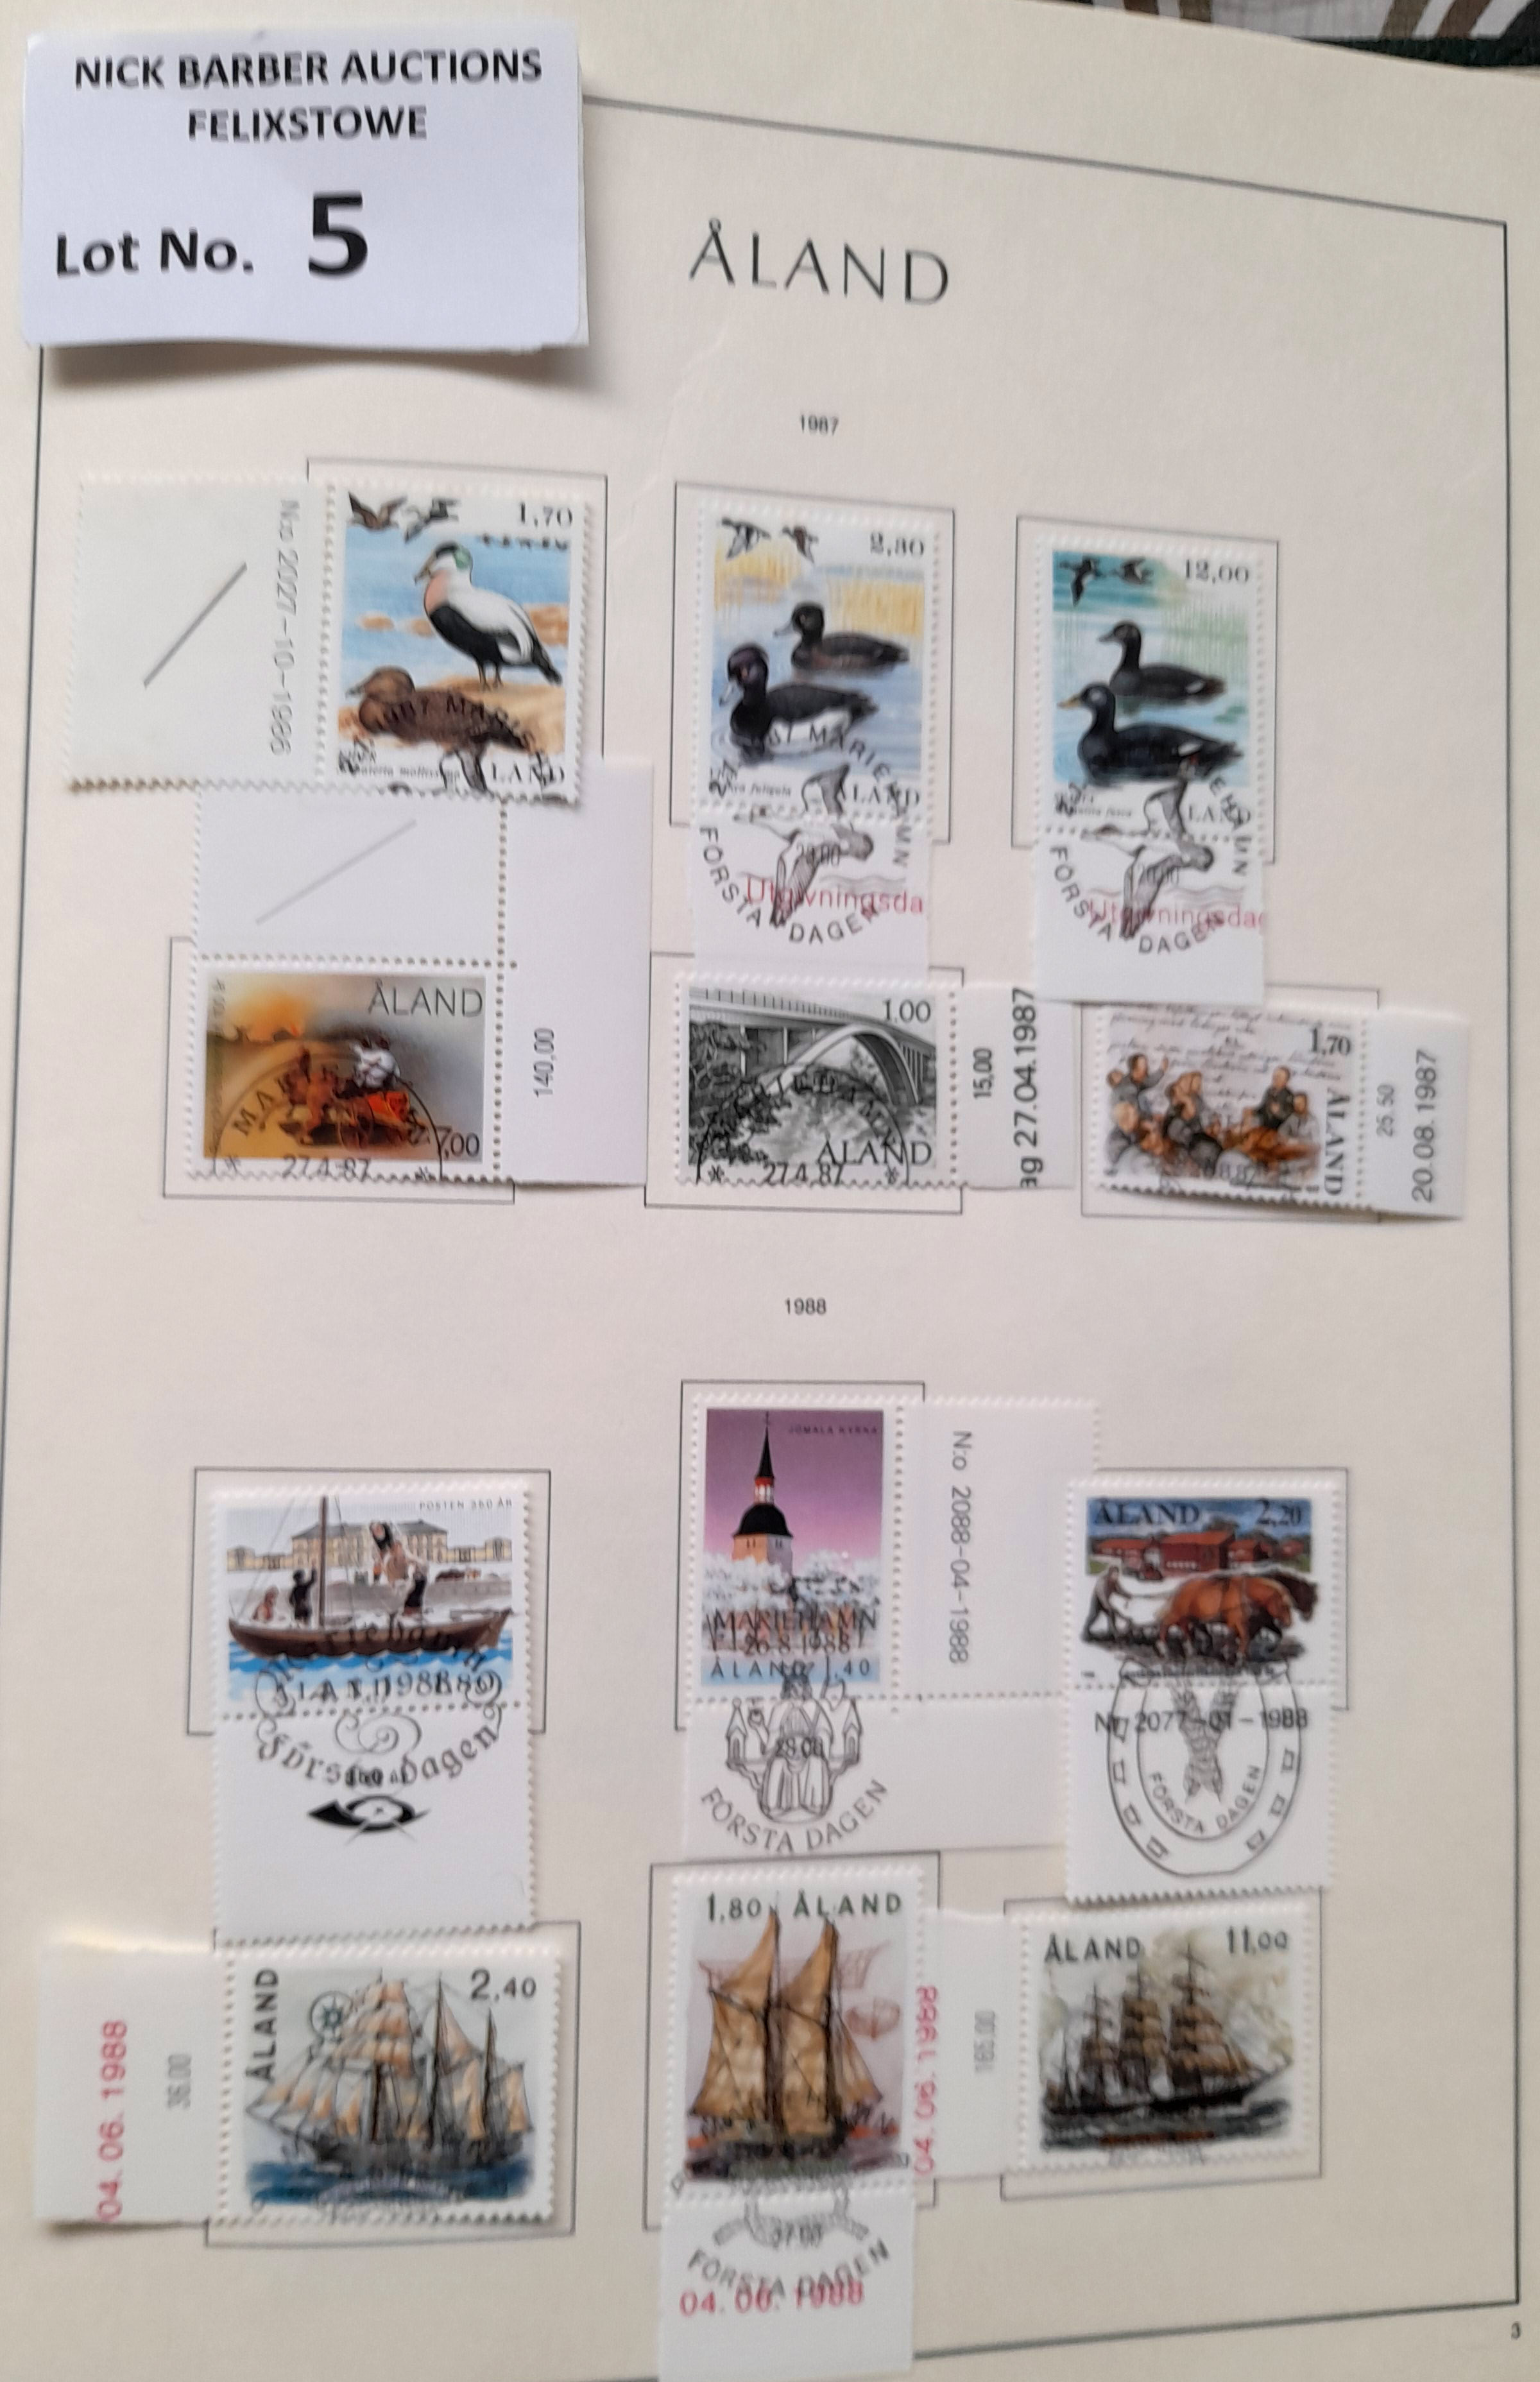 Stamps : Aland mint & used in Lighthouse Printed a - Image 3 of 3